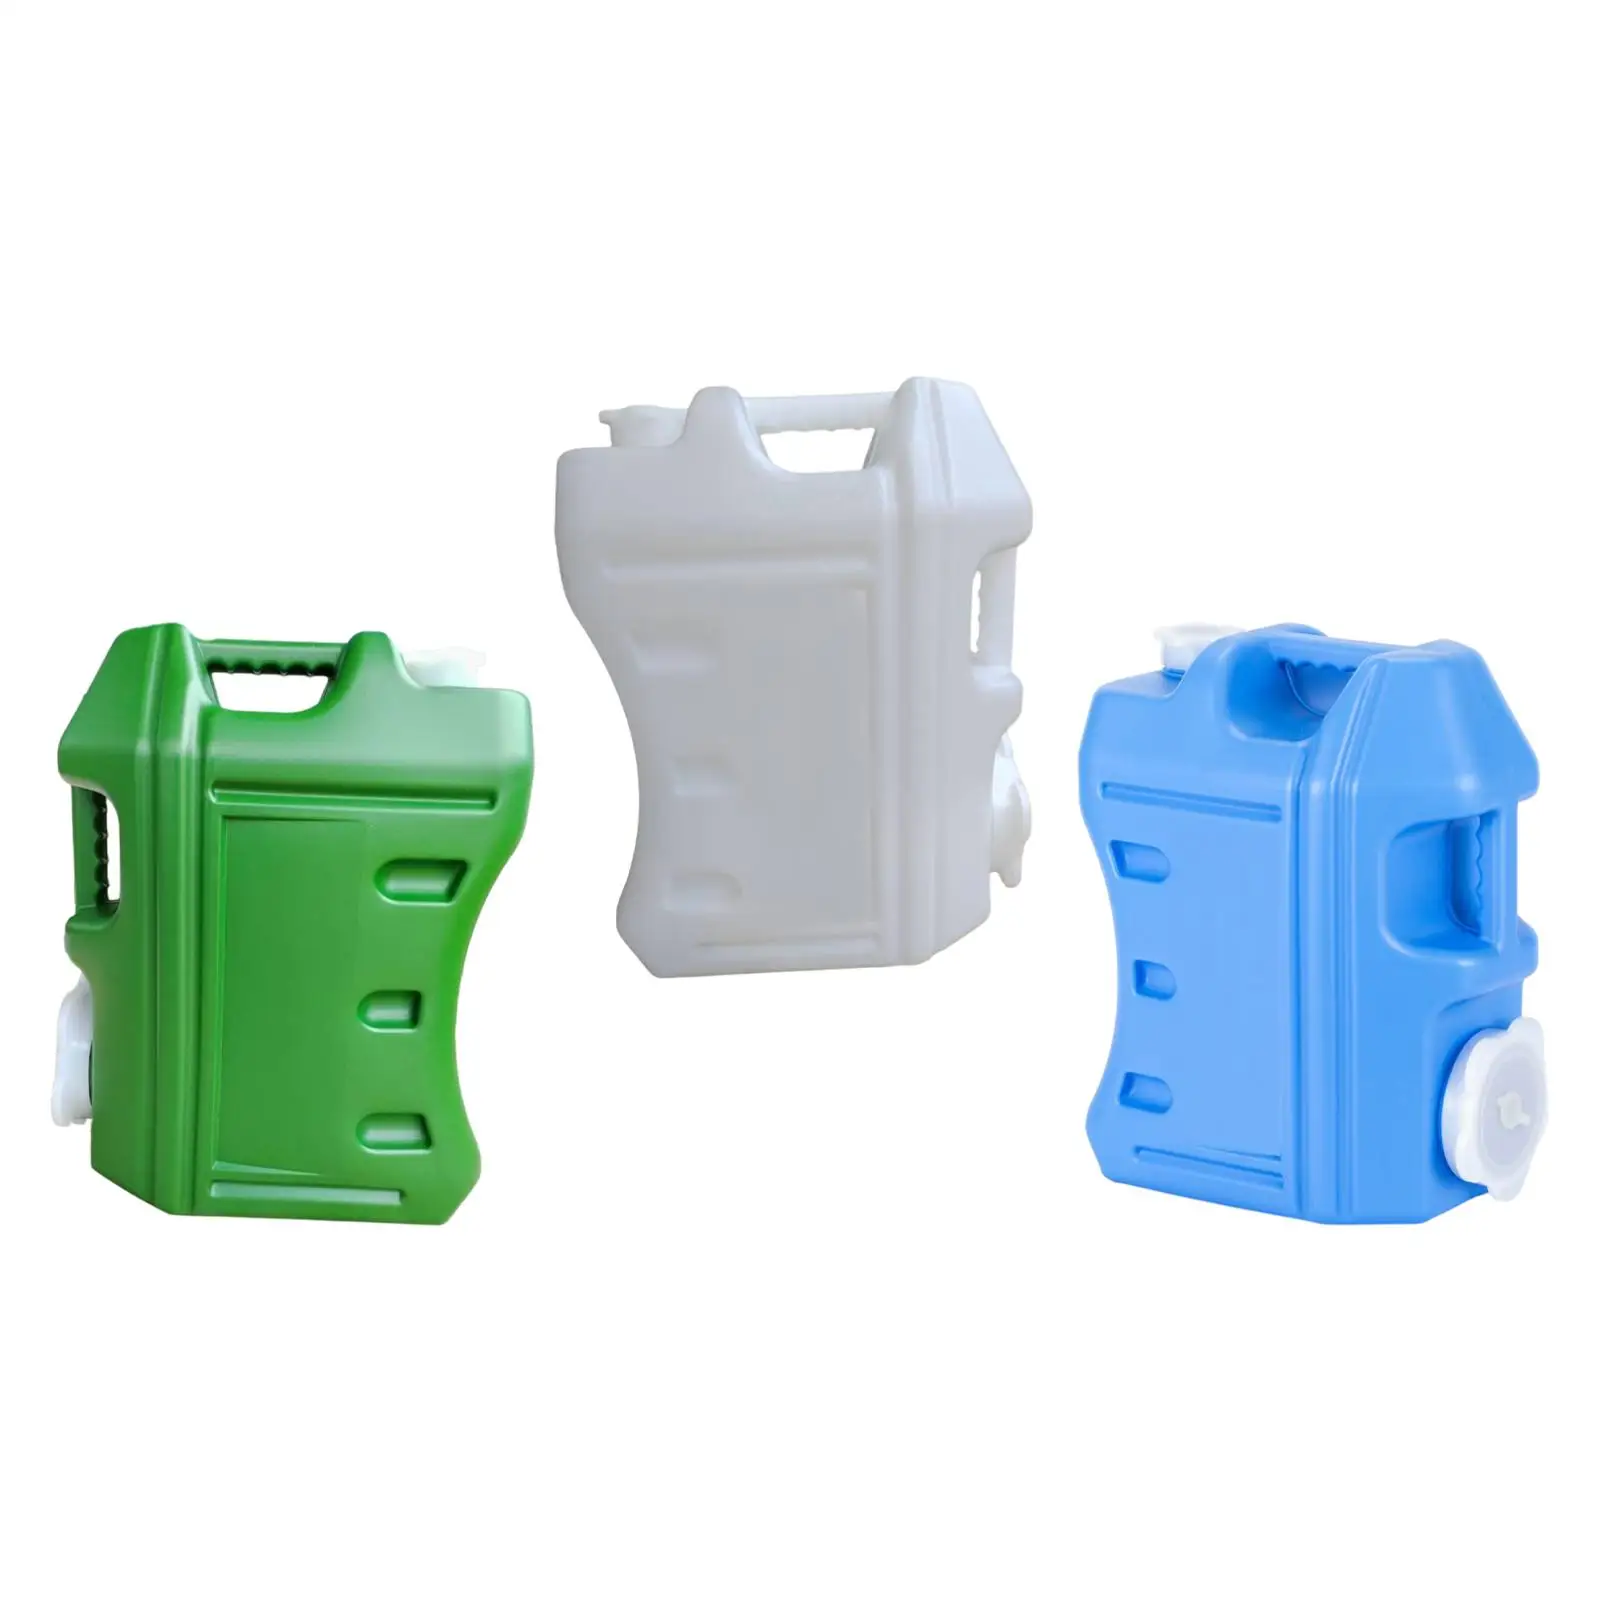 Portable Water Container Water Tank Water Storage Container Water Barrel for Camping Household Outdoor Self Driving Tour Bath